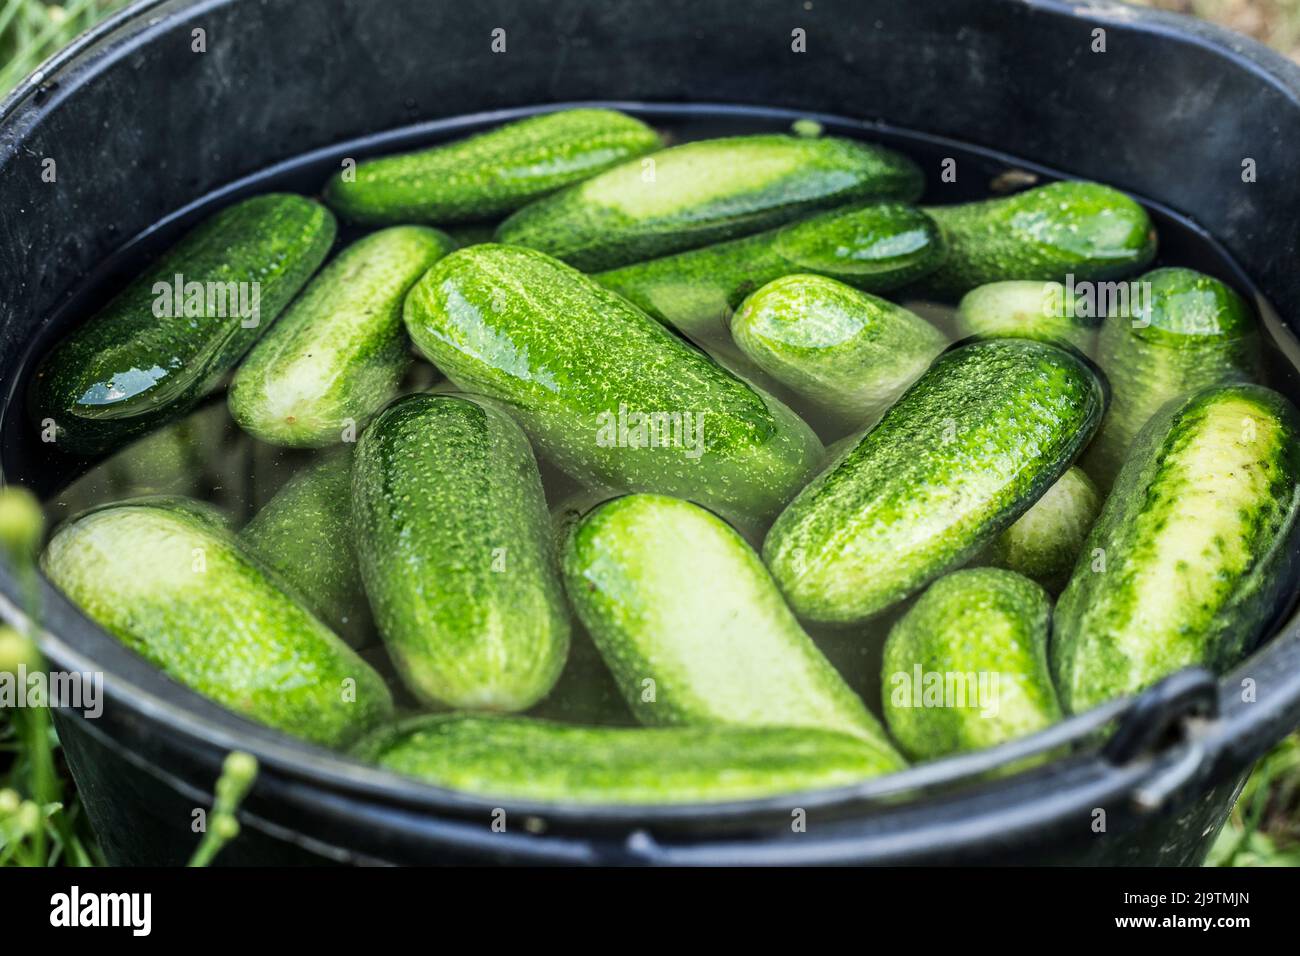 Soaking cucumbers in ice cold water for 4 to 5 hours before pickling gives nice crisp pickles. Home food hack. Stock Photo